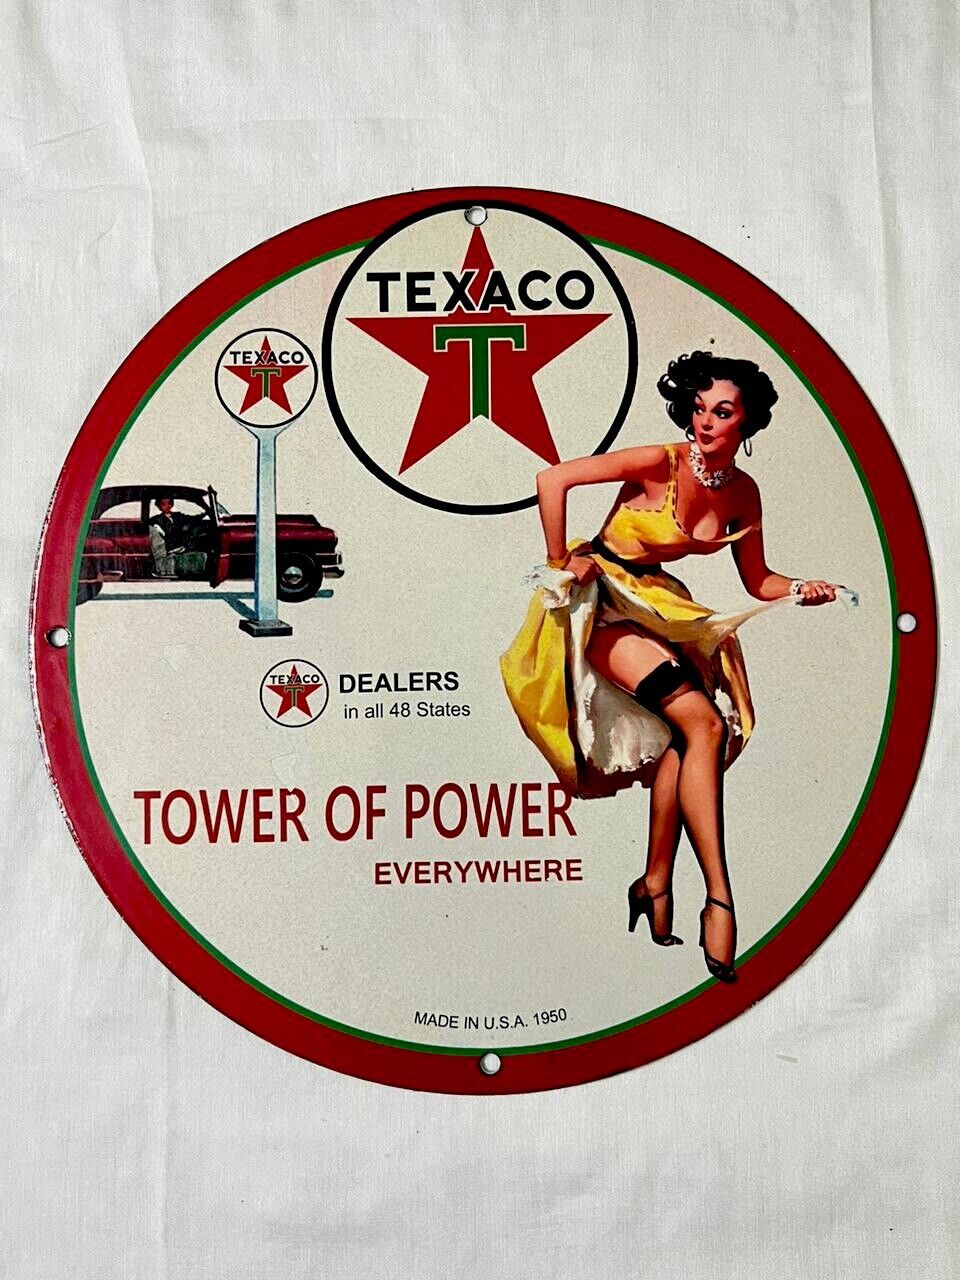 CLASSIC TEXACO DEALERS IN ALL 48 STATES GARAGE GIRL PINUP PORCELAIN ENAMEL SIGN.